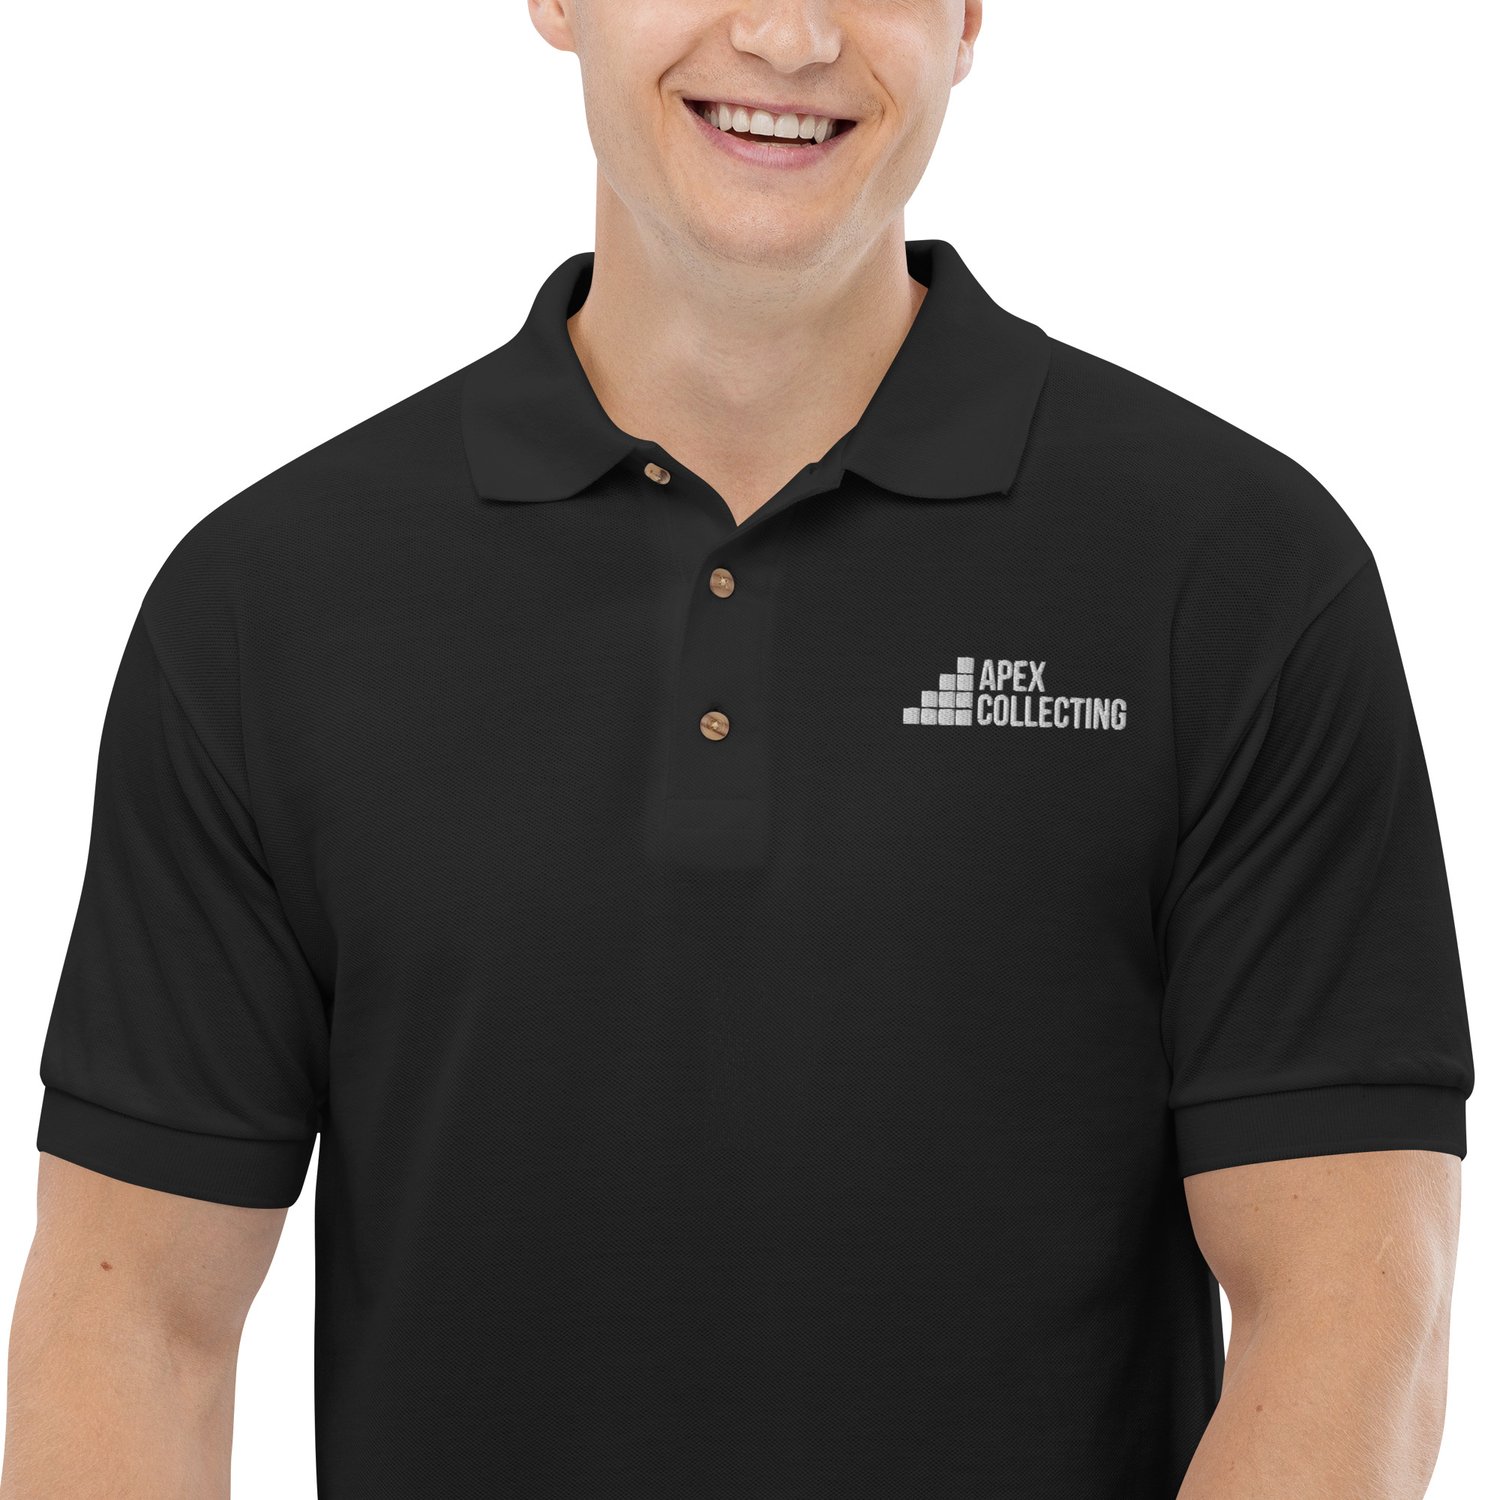 Image of Men's Apex Collecting Logo Embroidered Polo Shirt Black